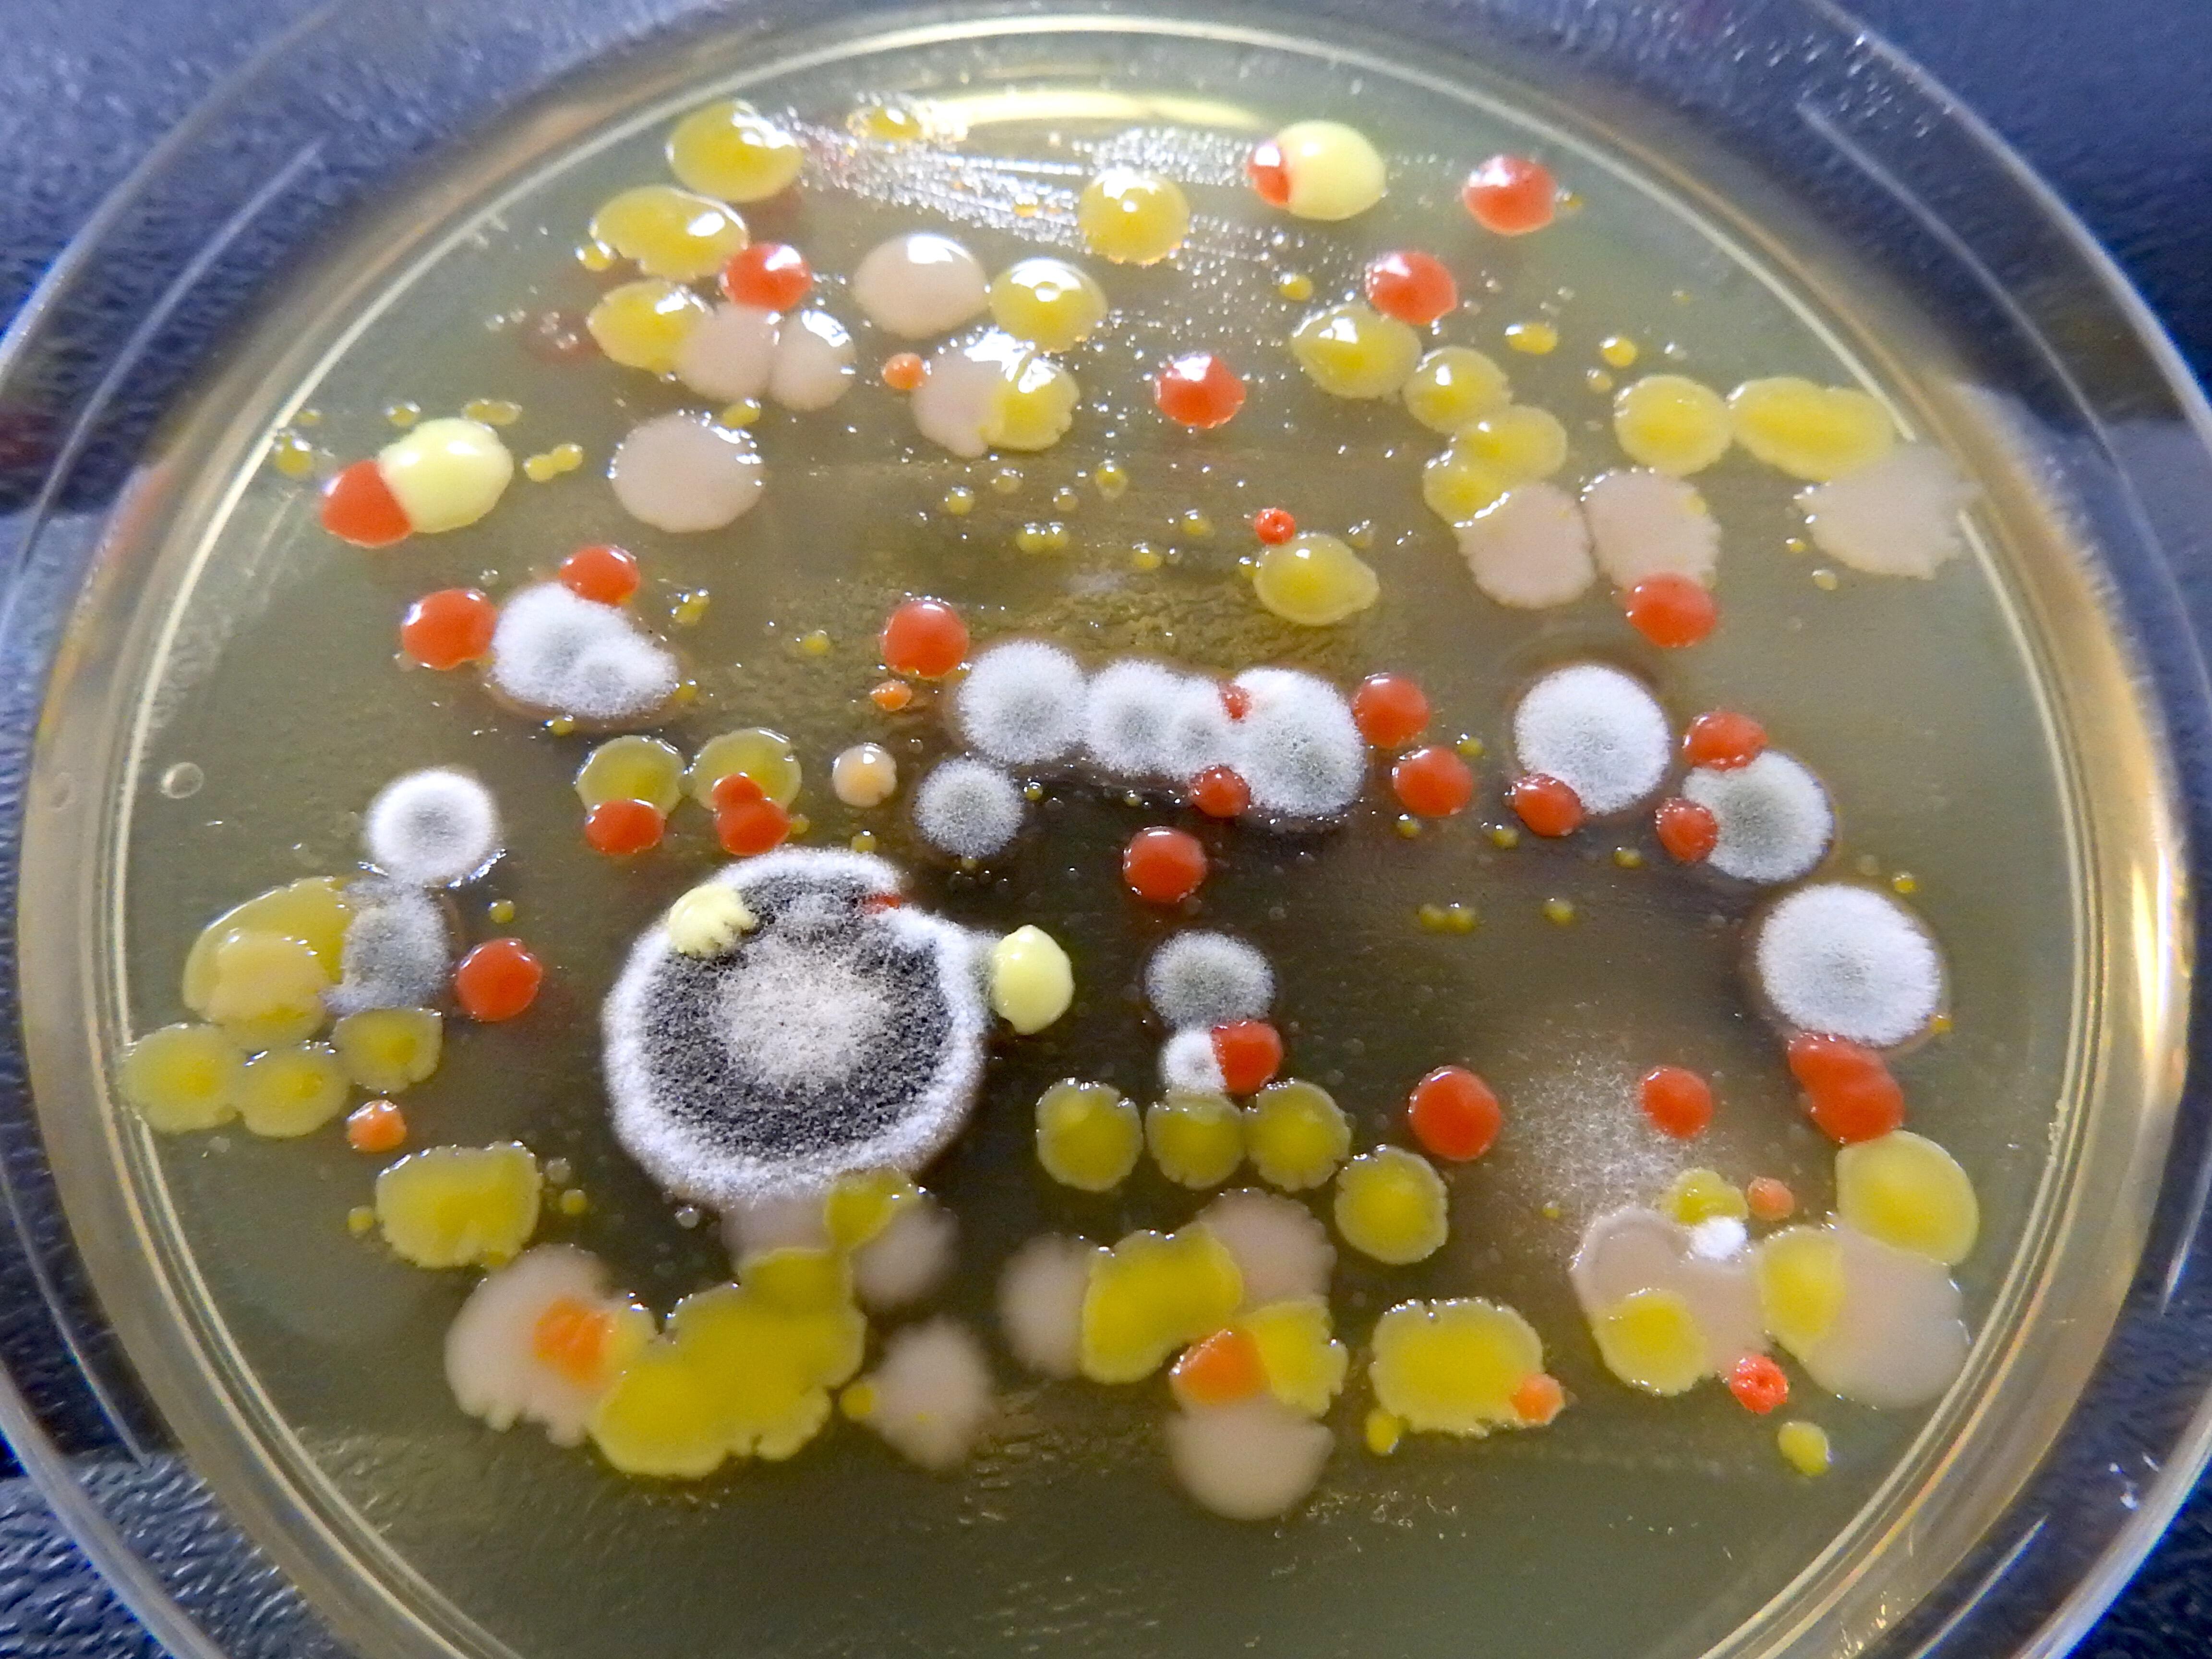 A variety of different bacteria and fungi isolated as part of LSTM's Swab and Send project 